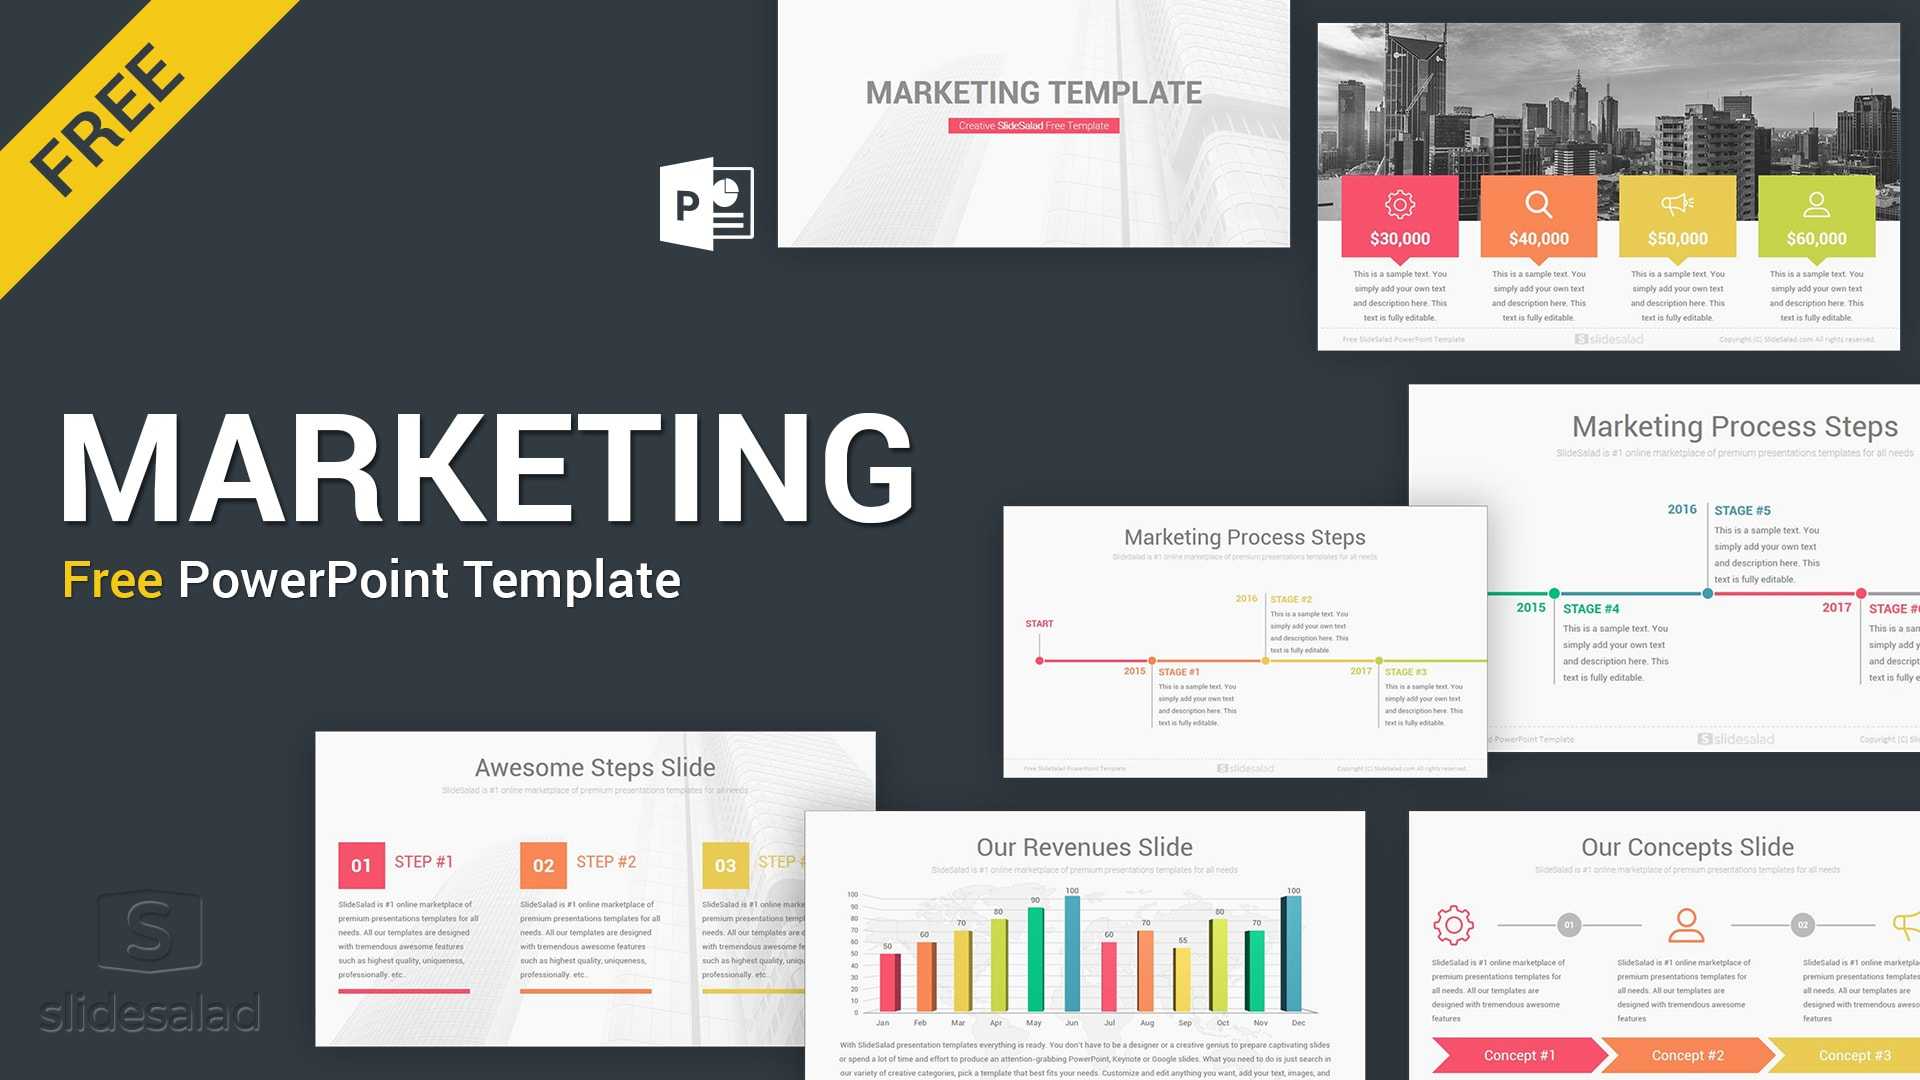 Marketing Free Download Powerpoint Template Slides – Slidesalad For Powerpoint Sample Templates Free Download